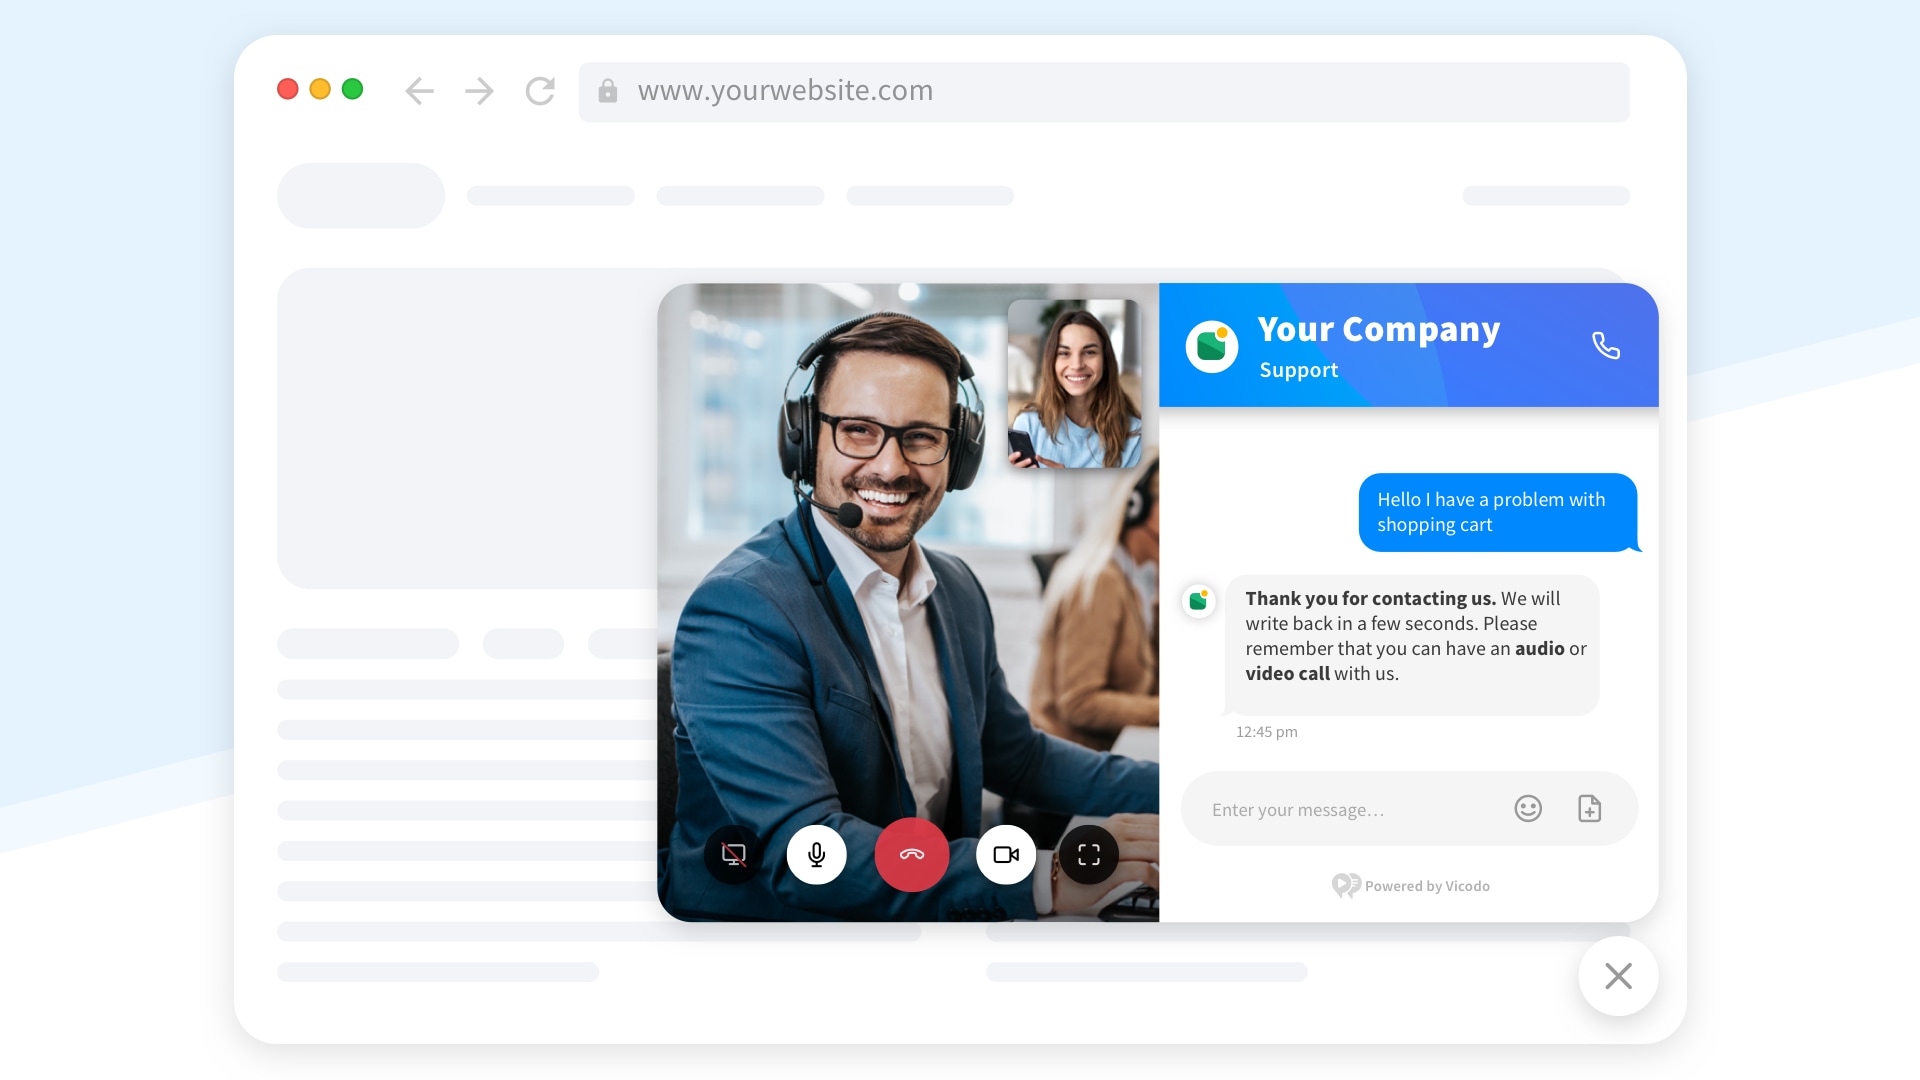 Run video calls directly in the chat window on your website.